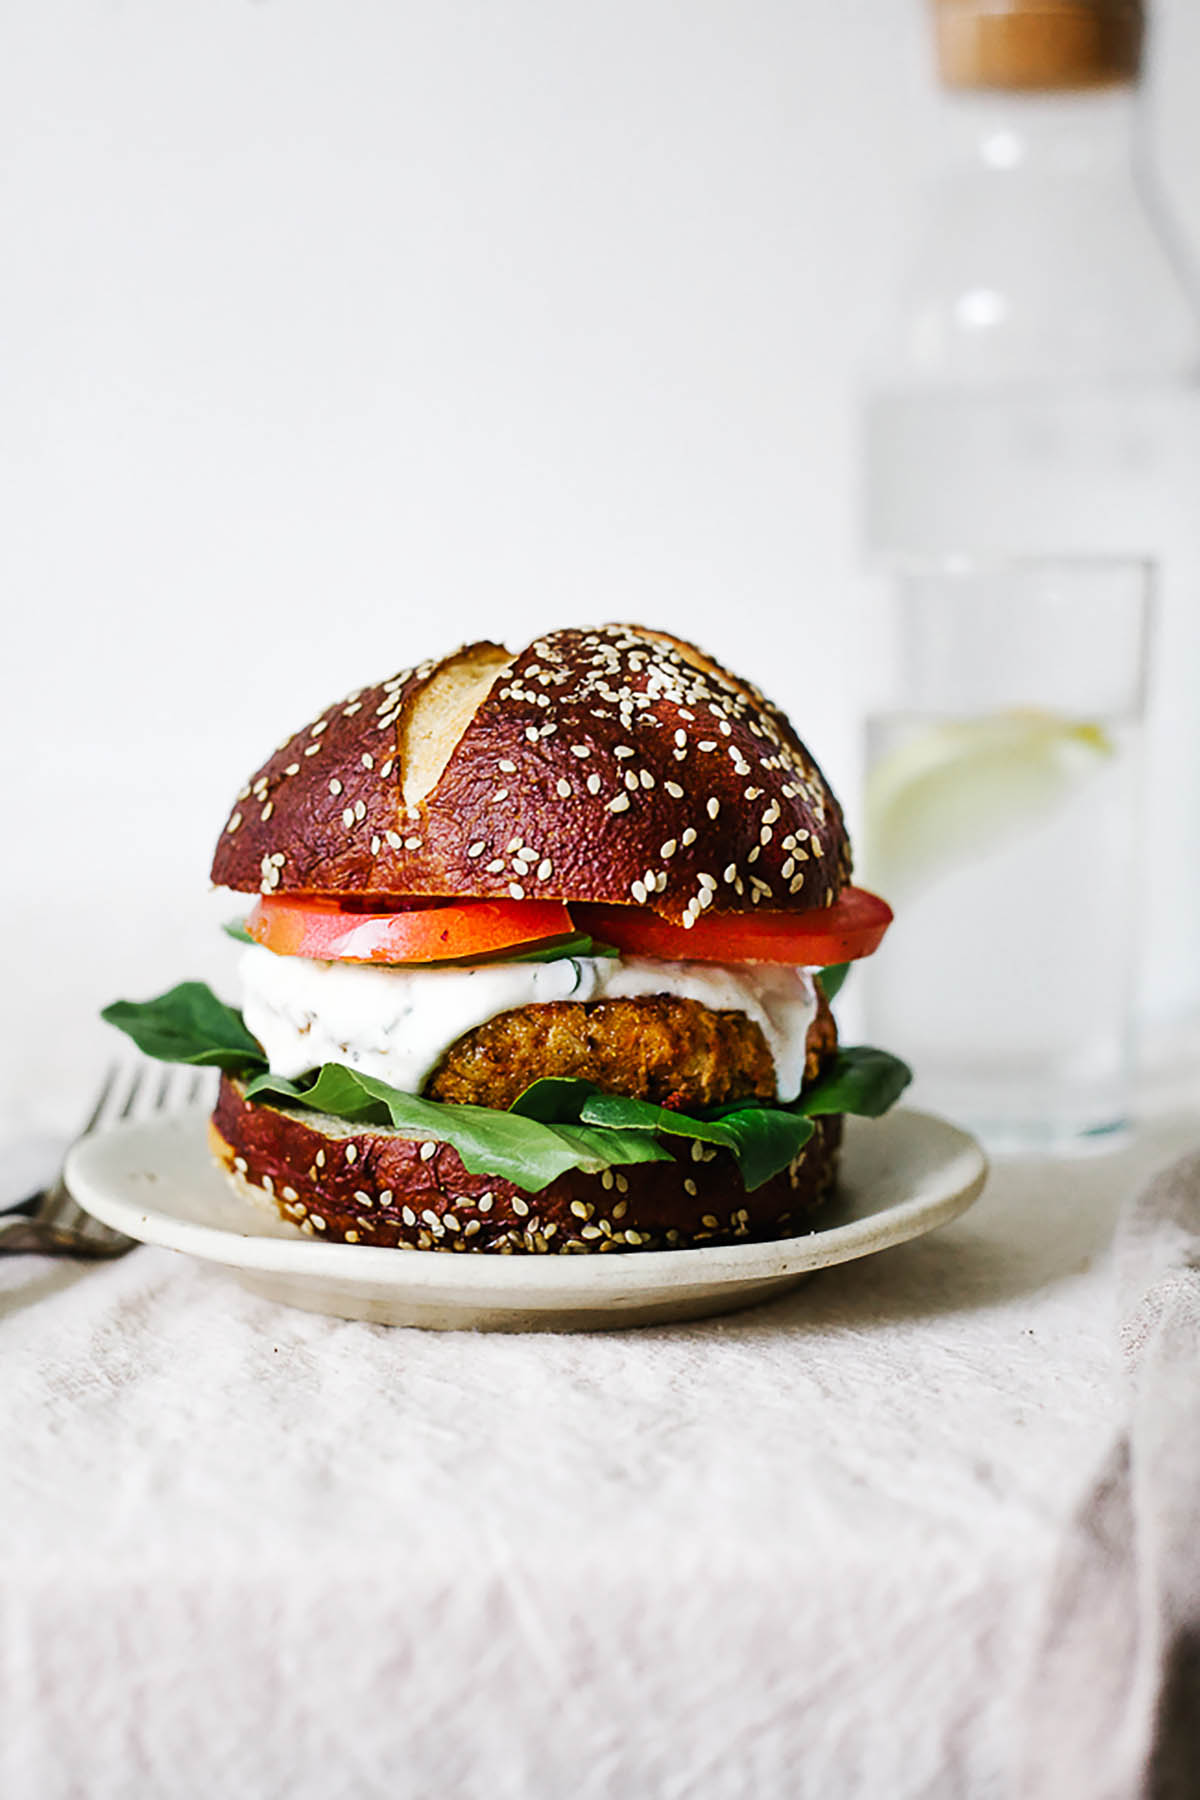 A chickpea burger on a bun topped with lettuce, white sauce, and tomatoes.